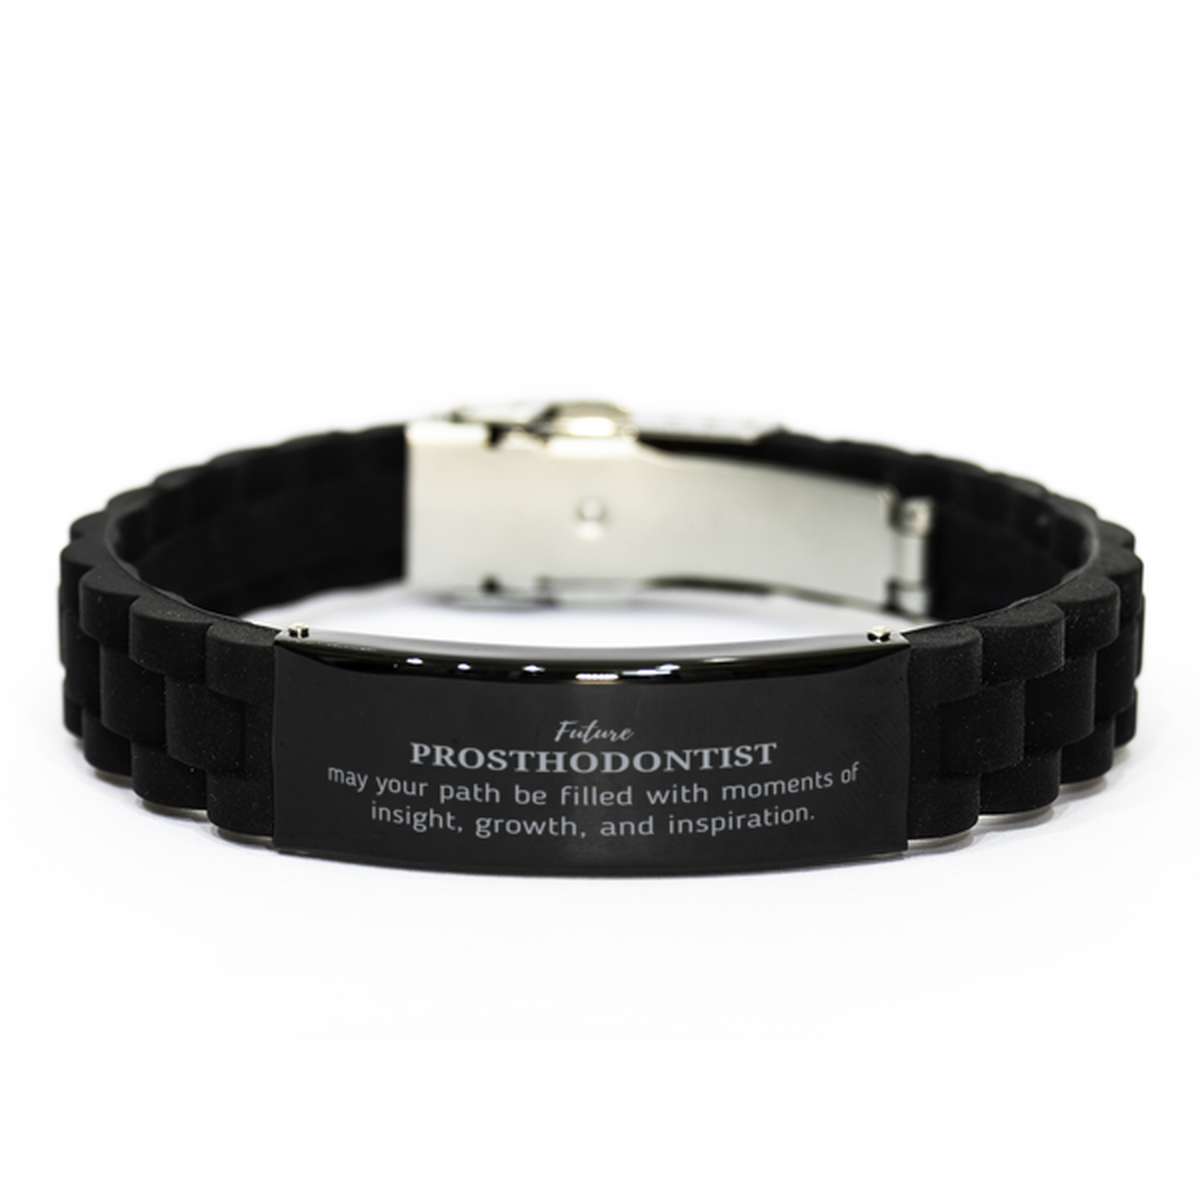 Future Prosthodontist Gifts, May your path be filled with moments of insight, Graduation Gifts for New Prosthodontist, Christmas Unique Black Glidelock Clasp Bracelet For Men, Women, Friends